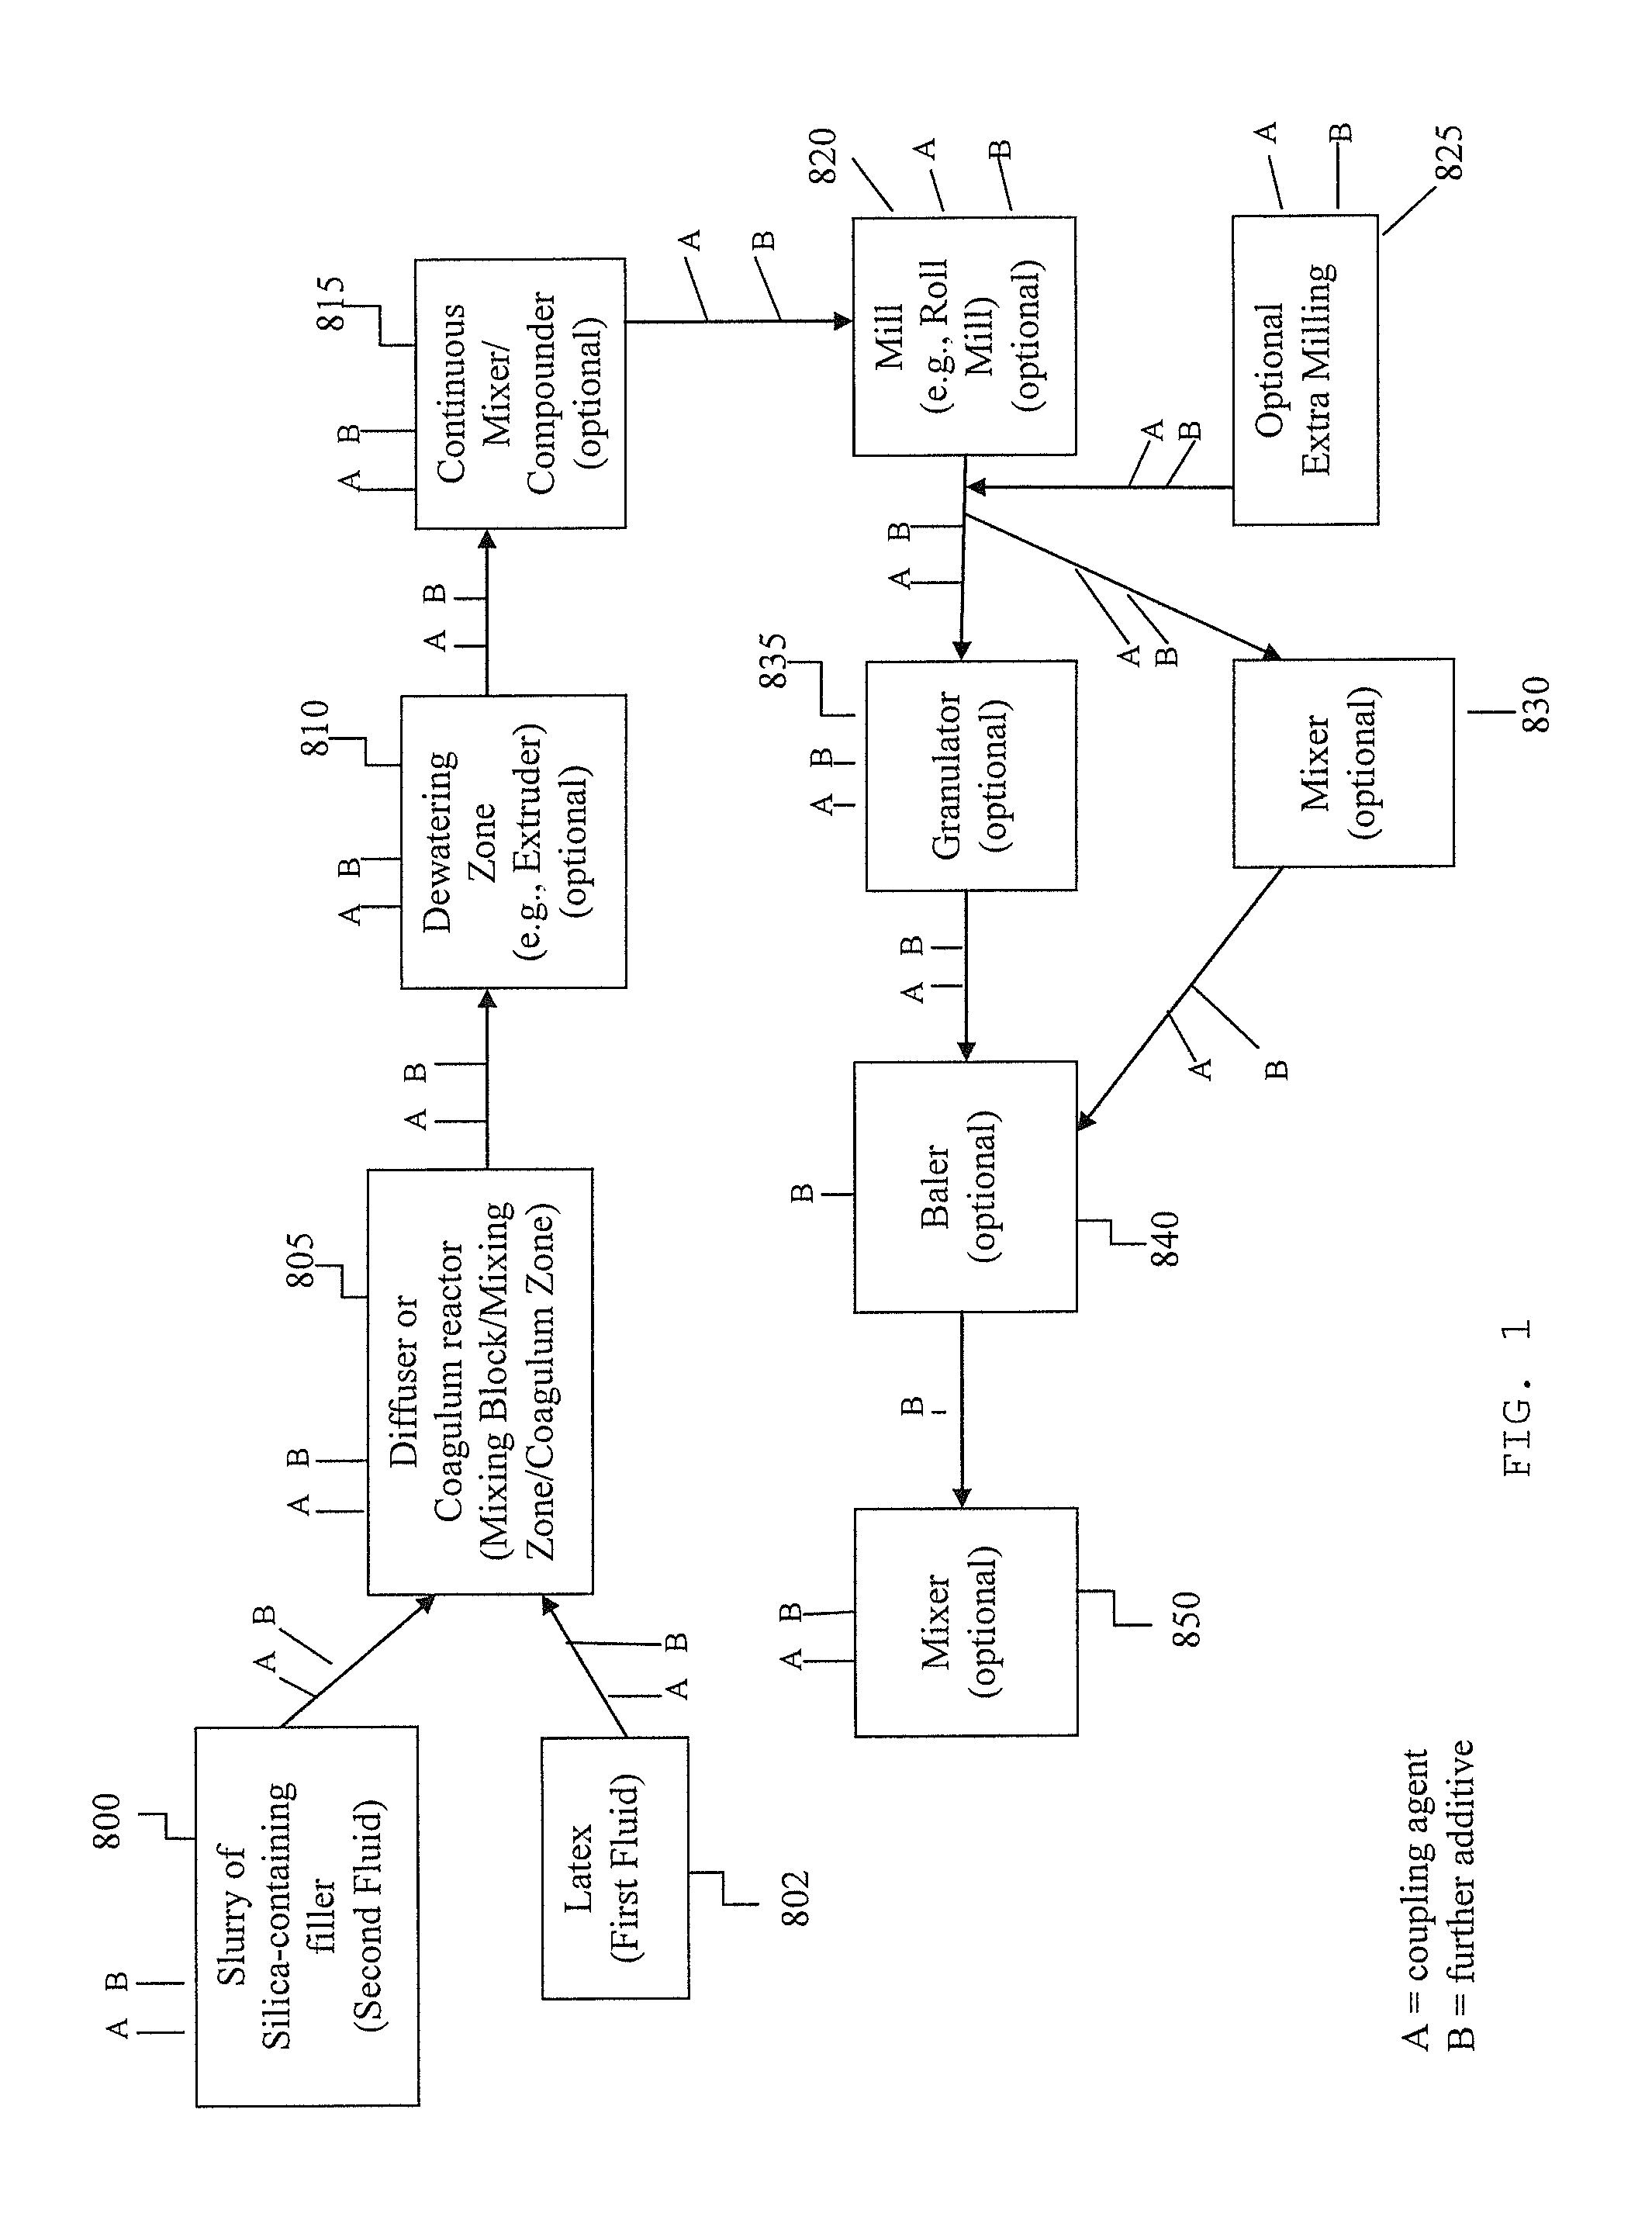 Elastomer composite with silica-containing filler and methods to produce same